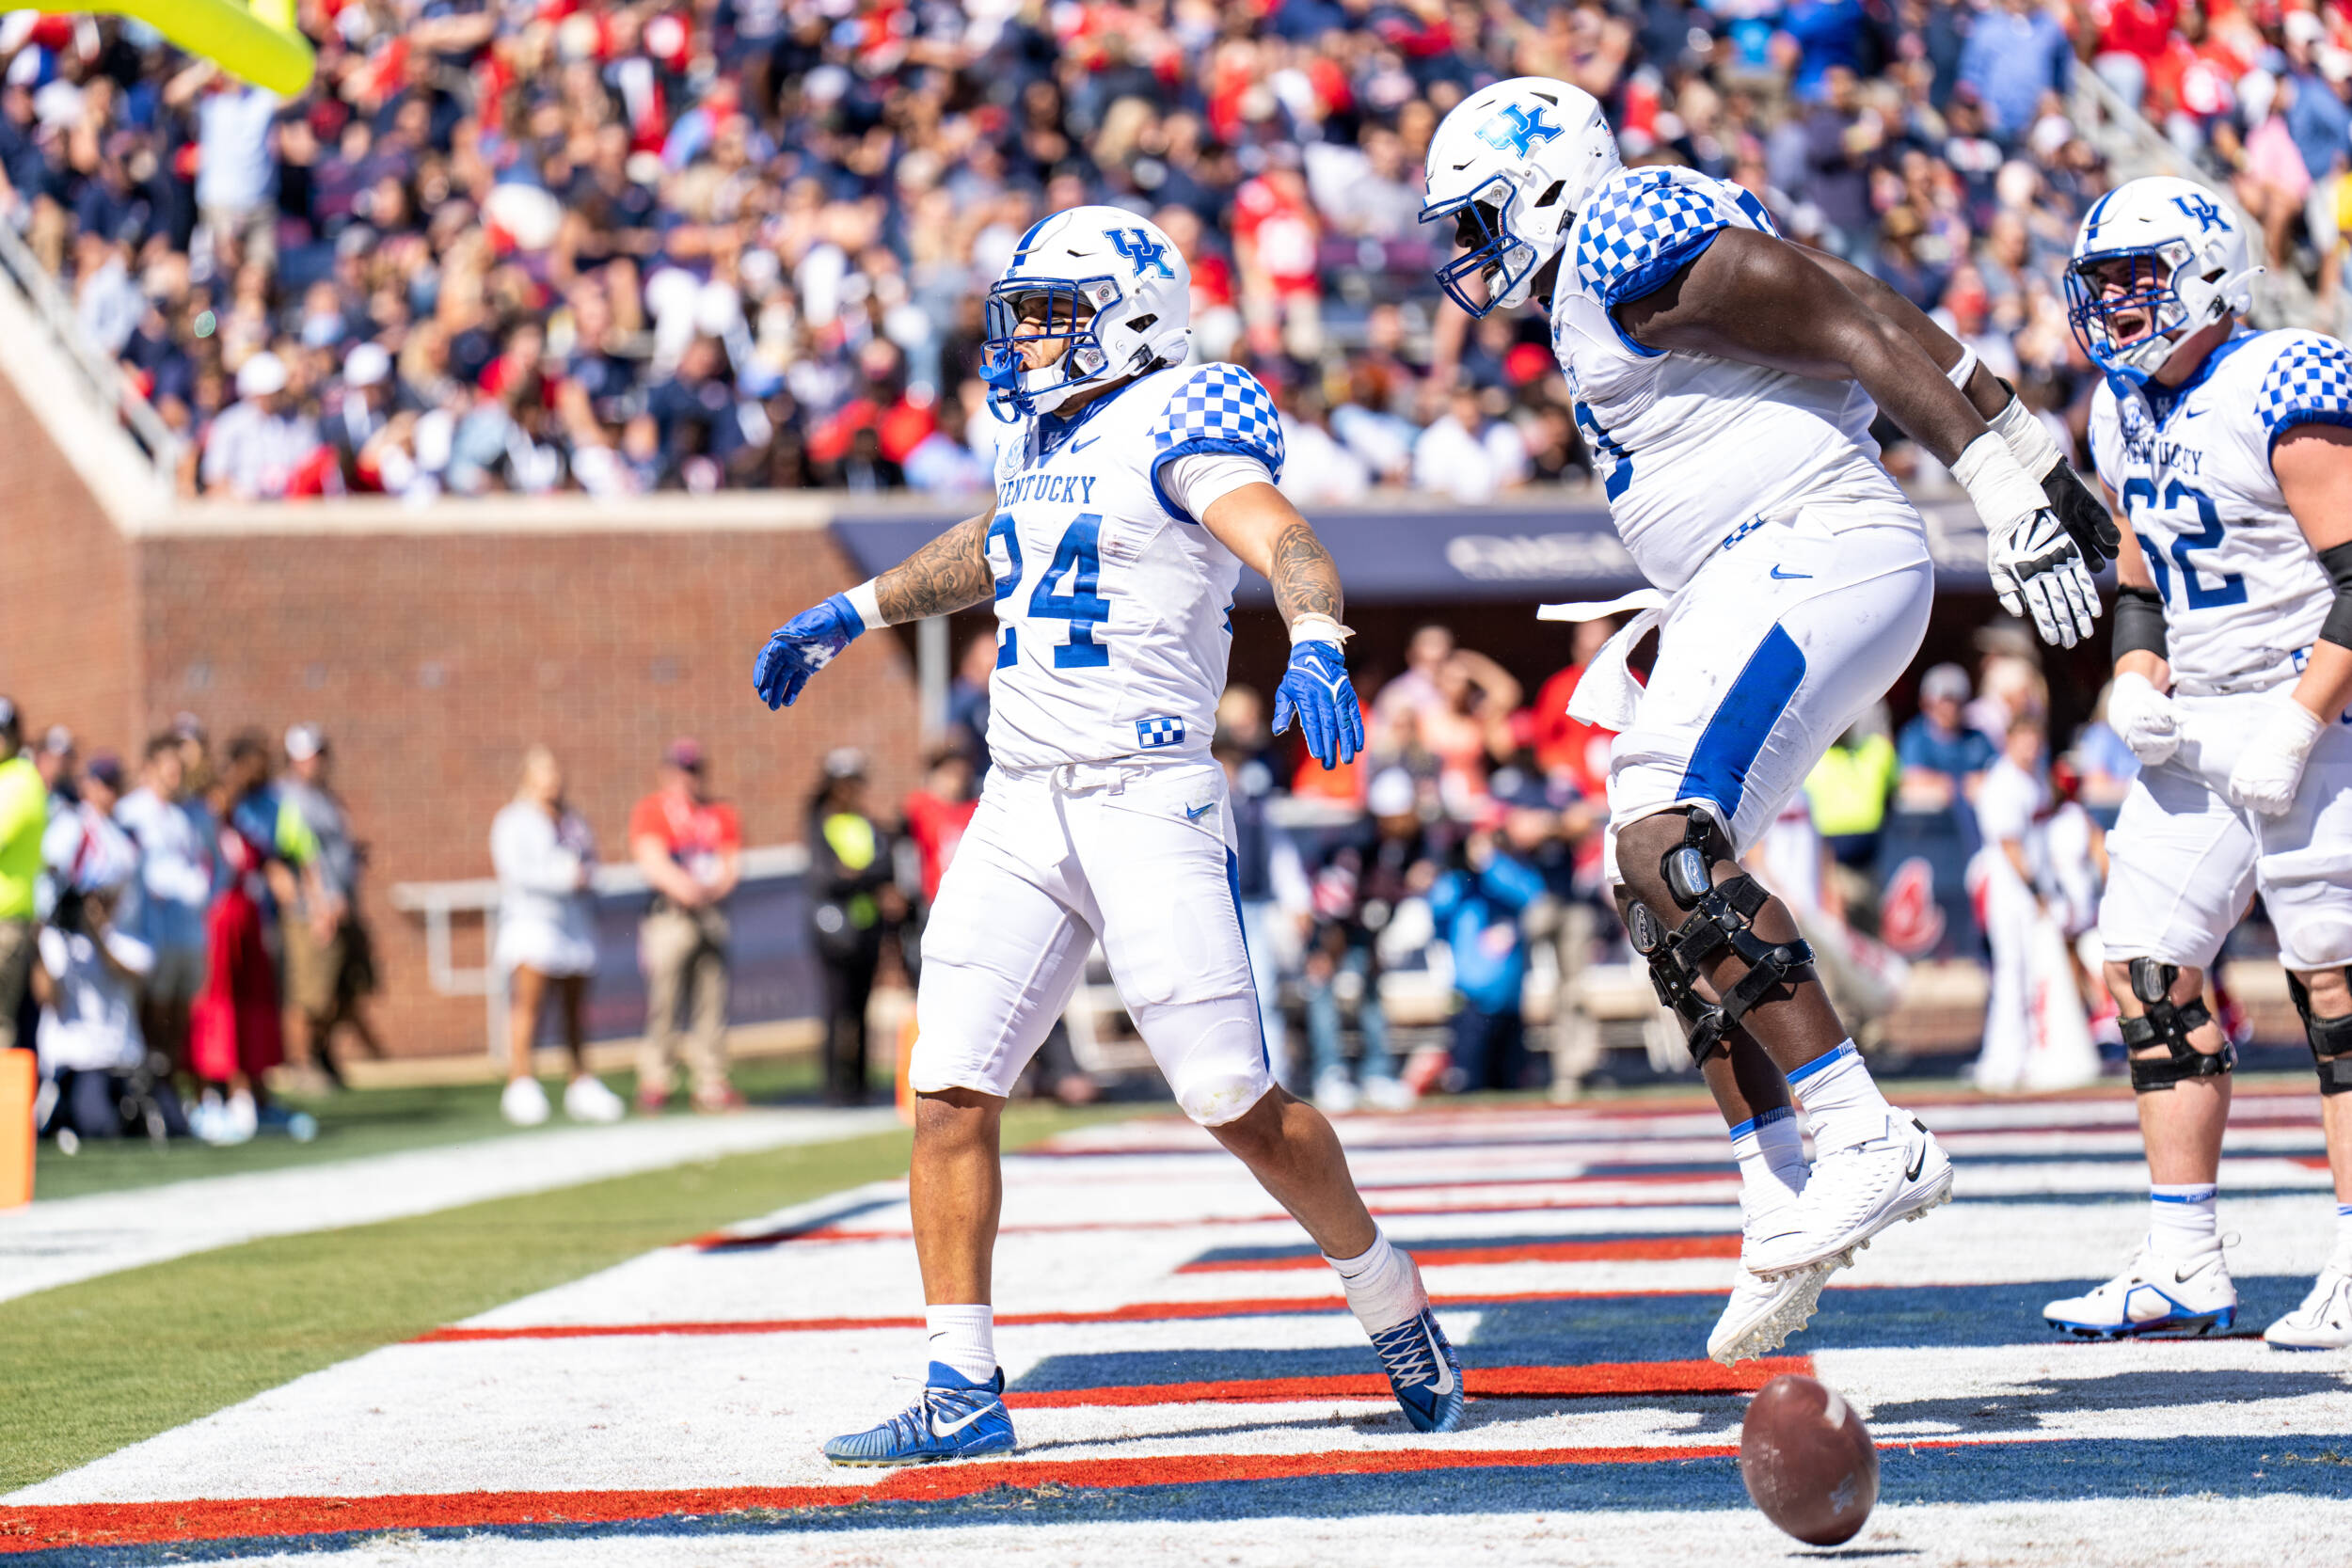 Kentucky-Ole Miss Postgame Notes